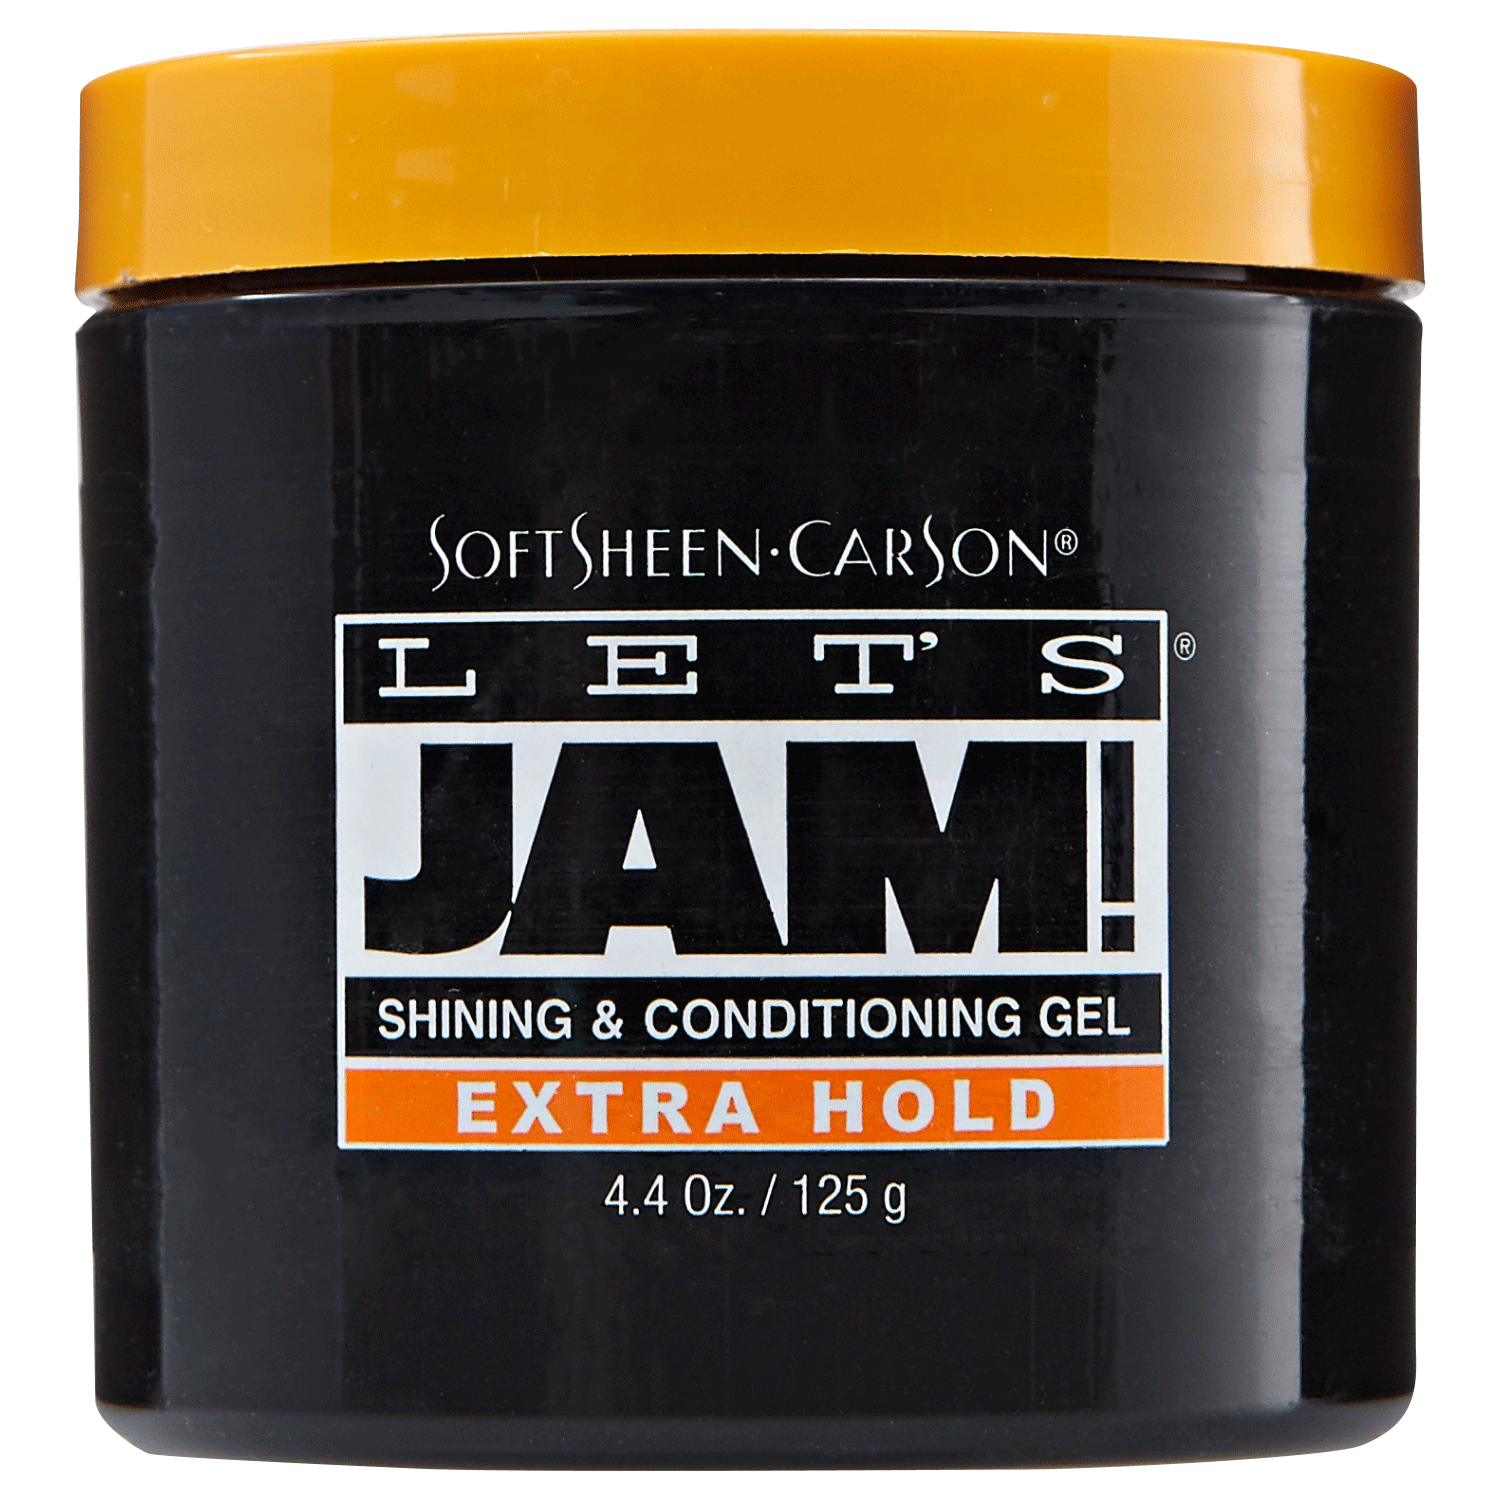 Let's Jam Conditioning Gel Extra Hold 14oz